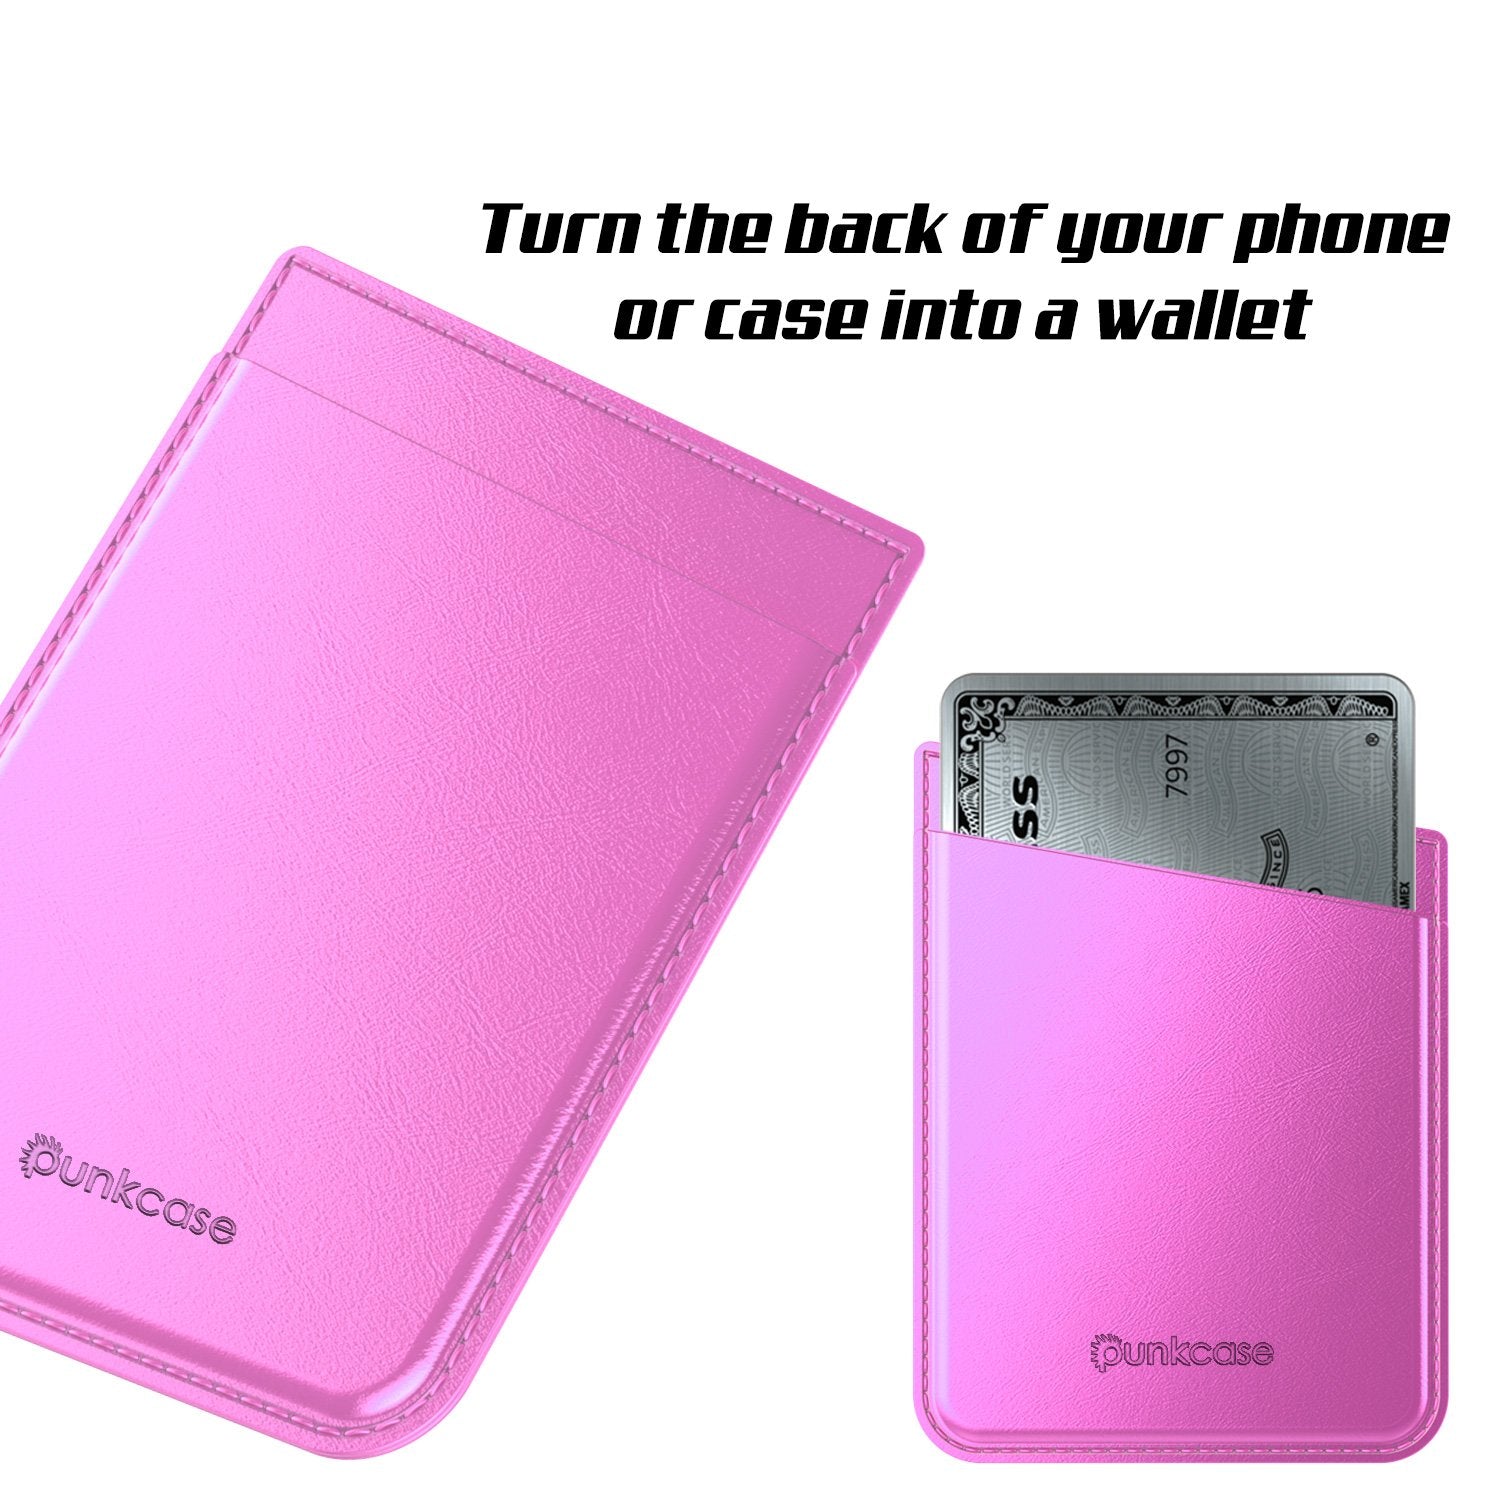 PunkCase CardStud Deluxe Stick On Wallet | Adhesive Card Holder Attachment for Back of iPhone, Android & More | Leather Pouch | [Pink]